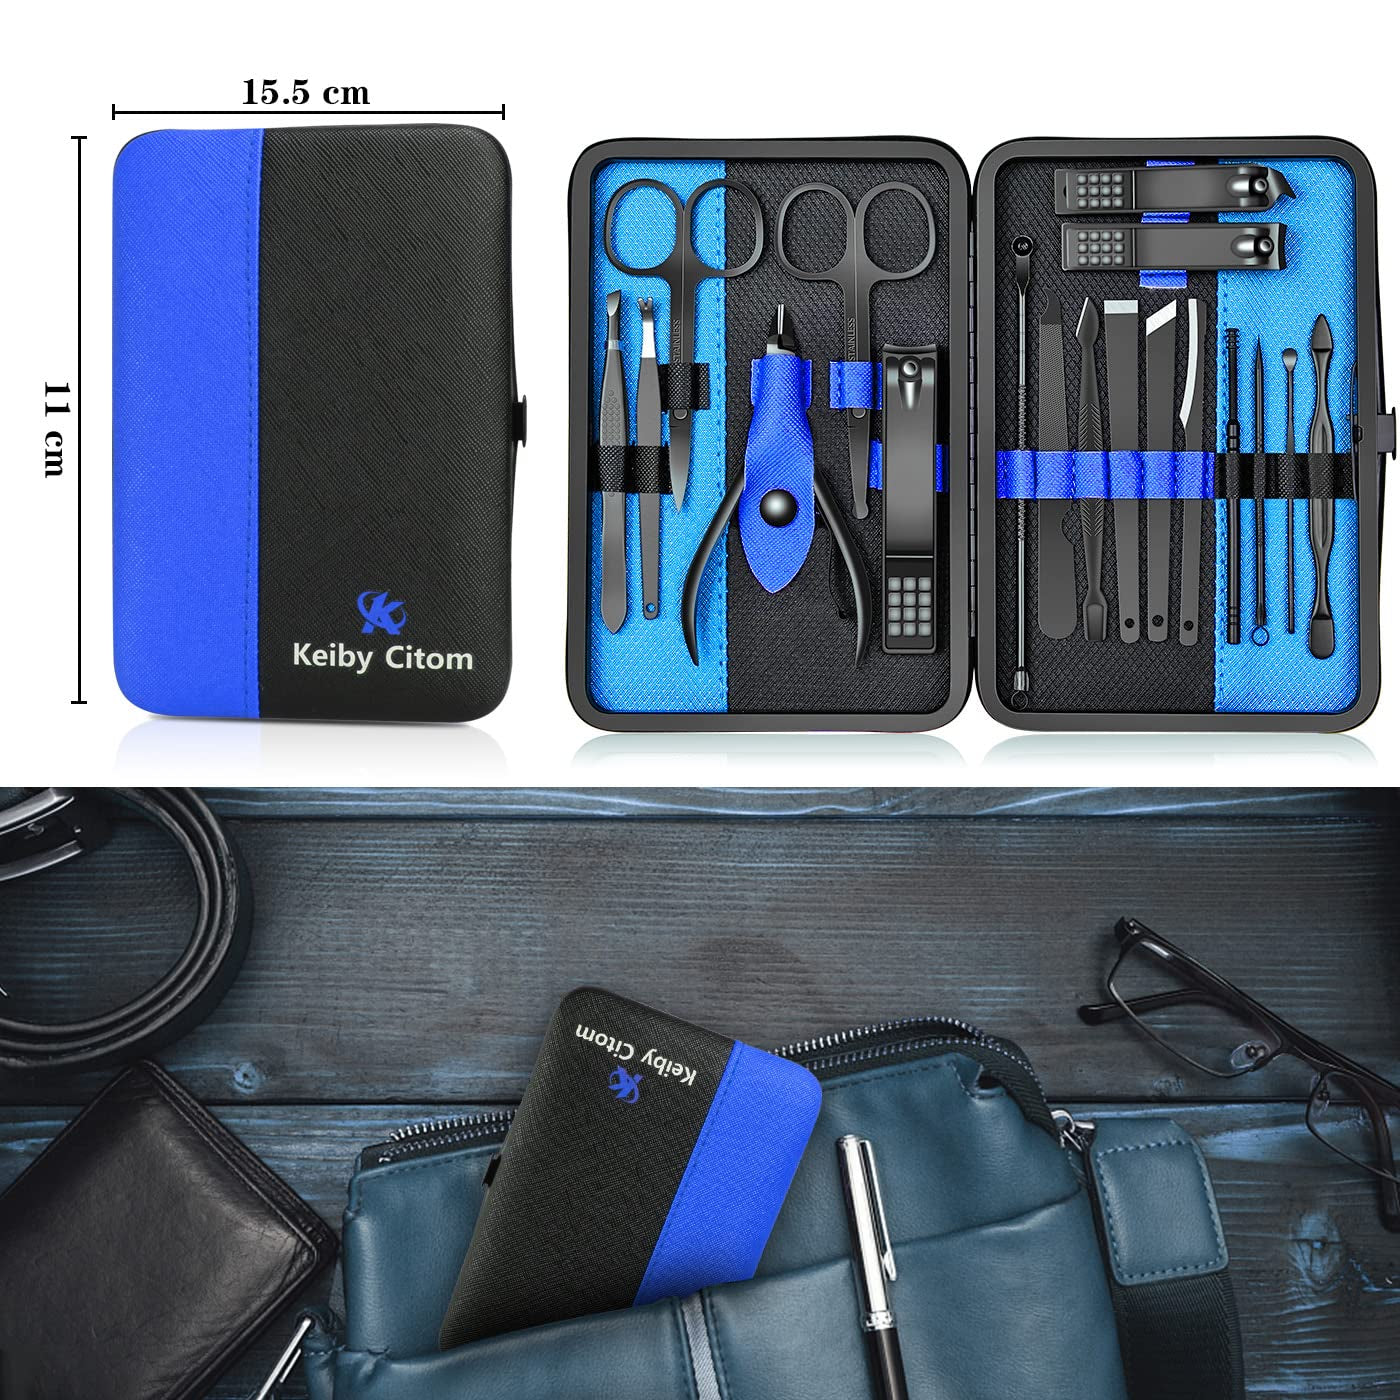 Keiby Citom Professional Stainless Steel Nail Clipper Travel & Grooming Kit Nail Tools Manicure & Pedicure Set of 18Pcs with Luxurious Case (Black/Blue)